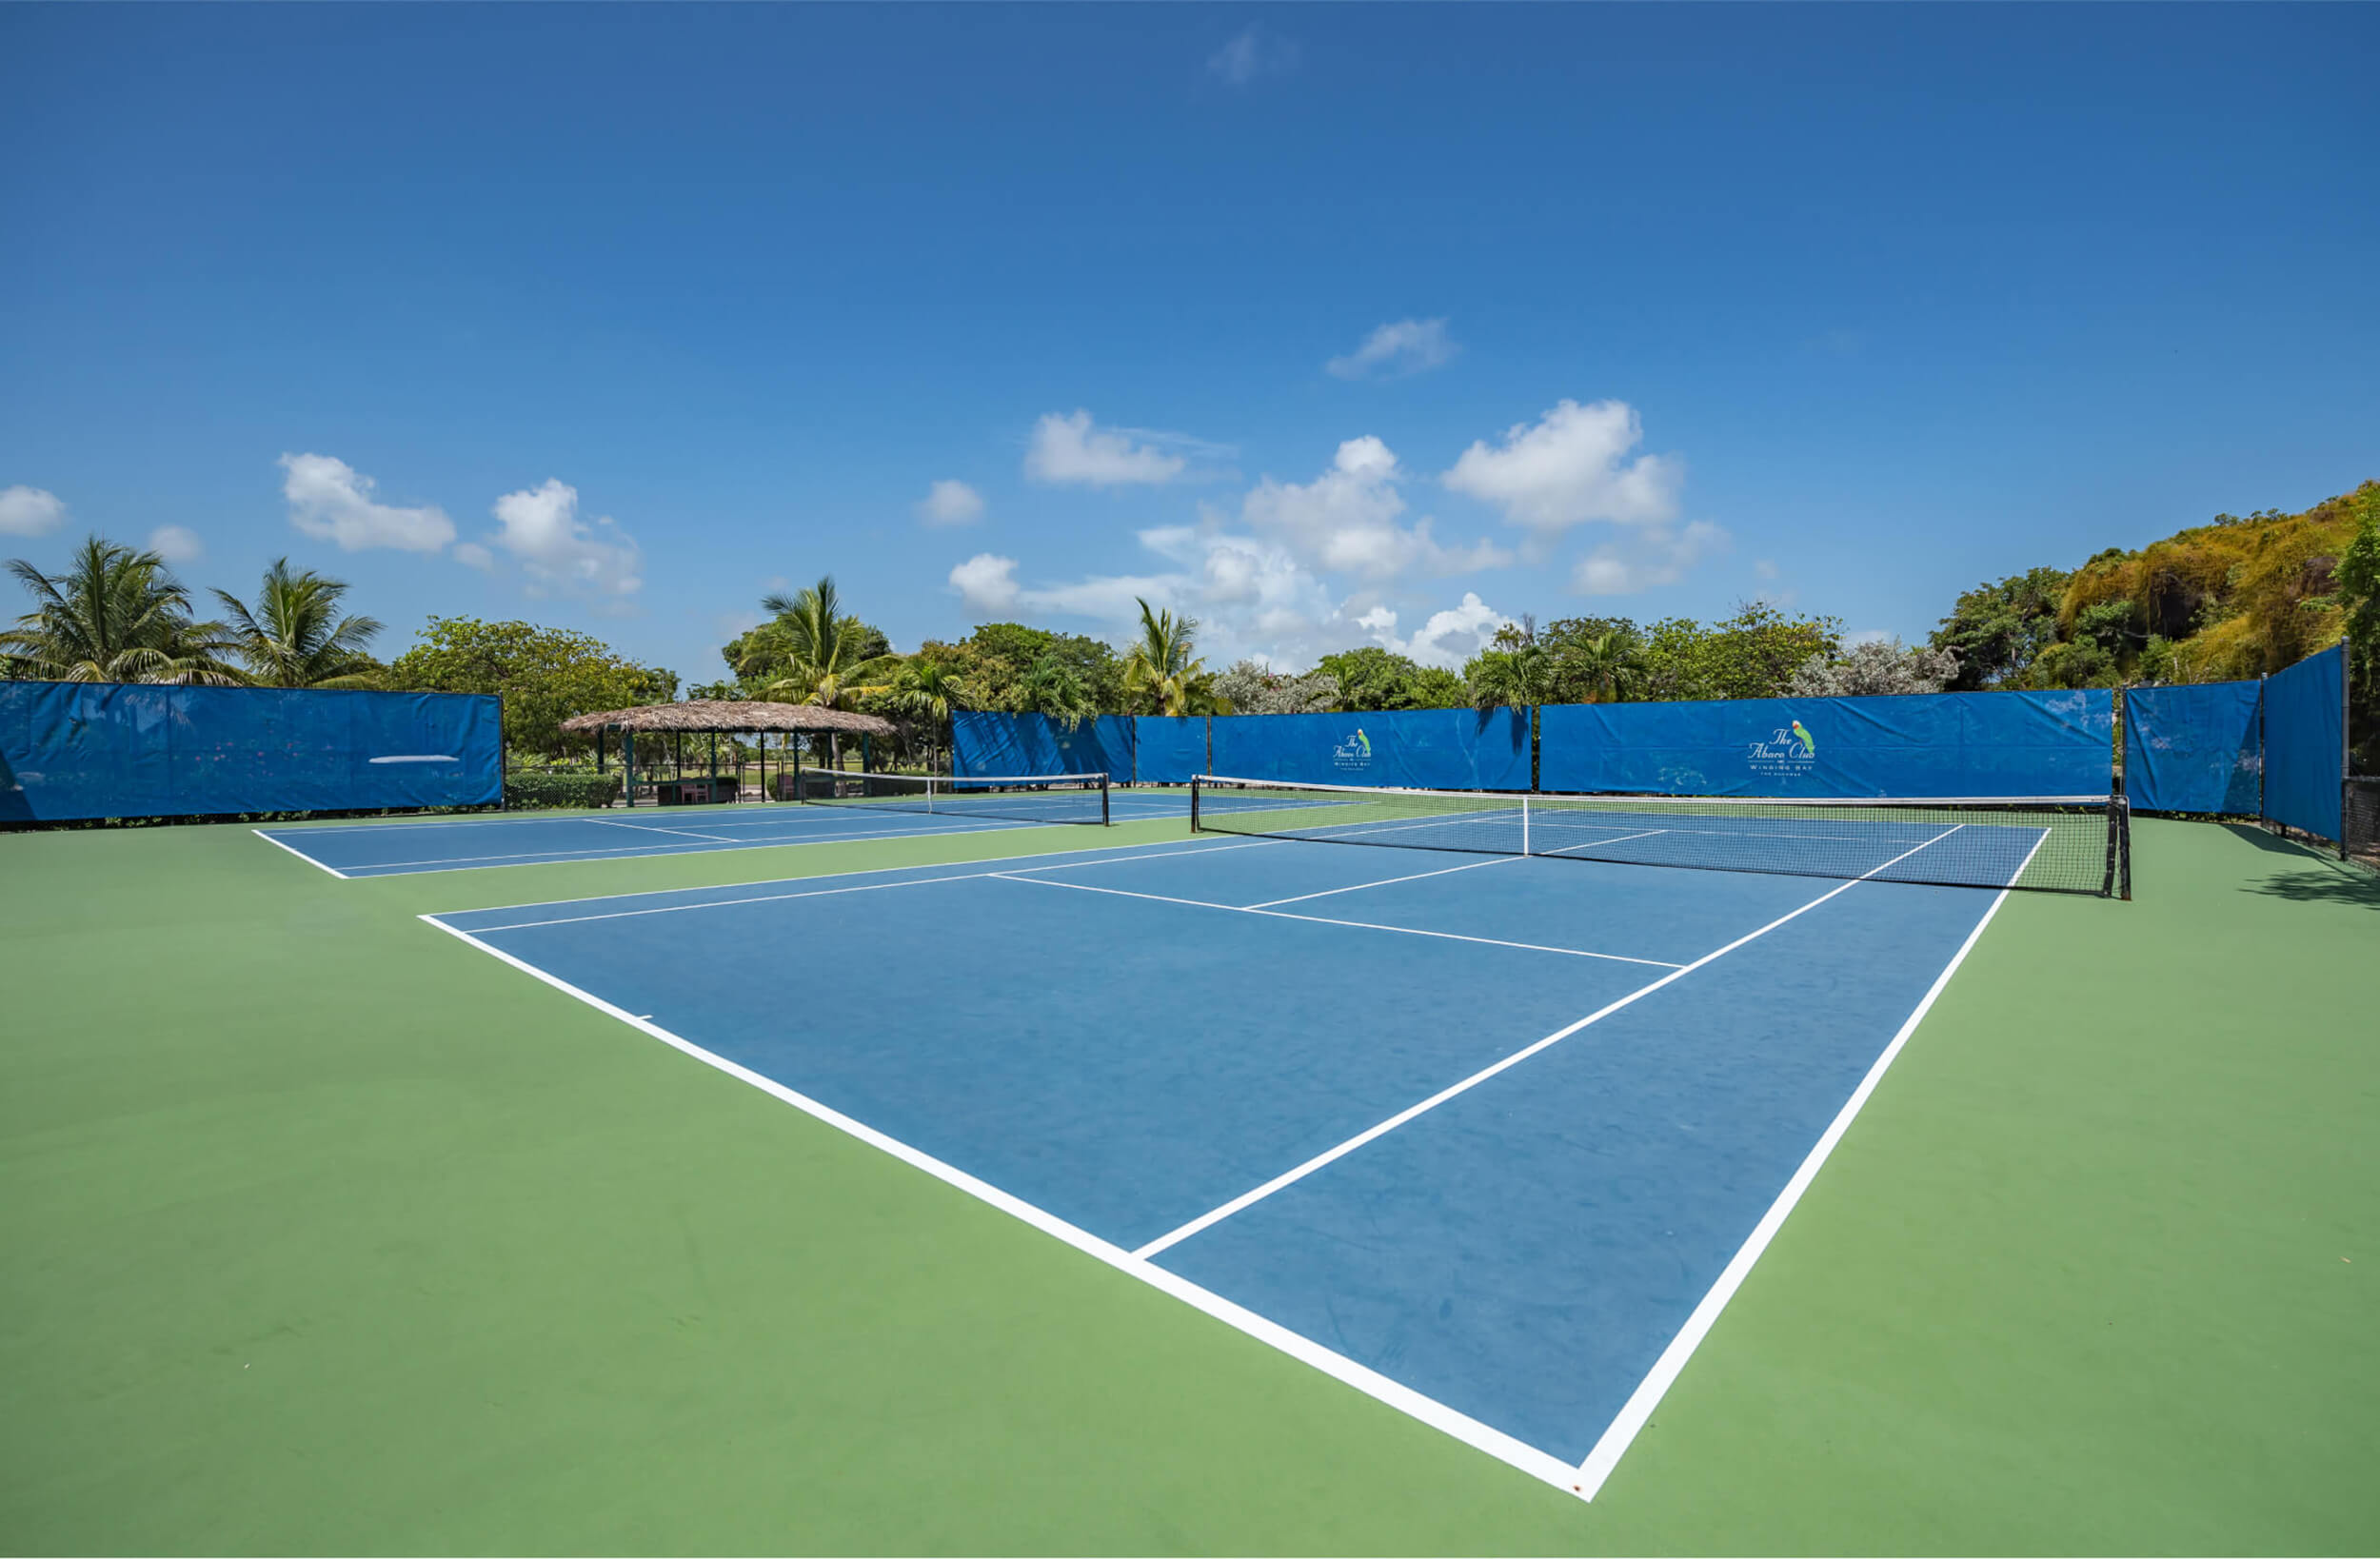 Tennis court of The Abaco Club